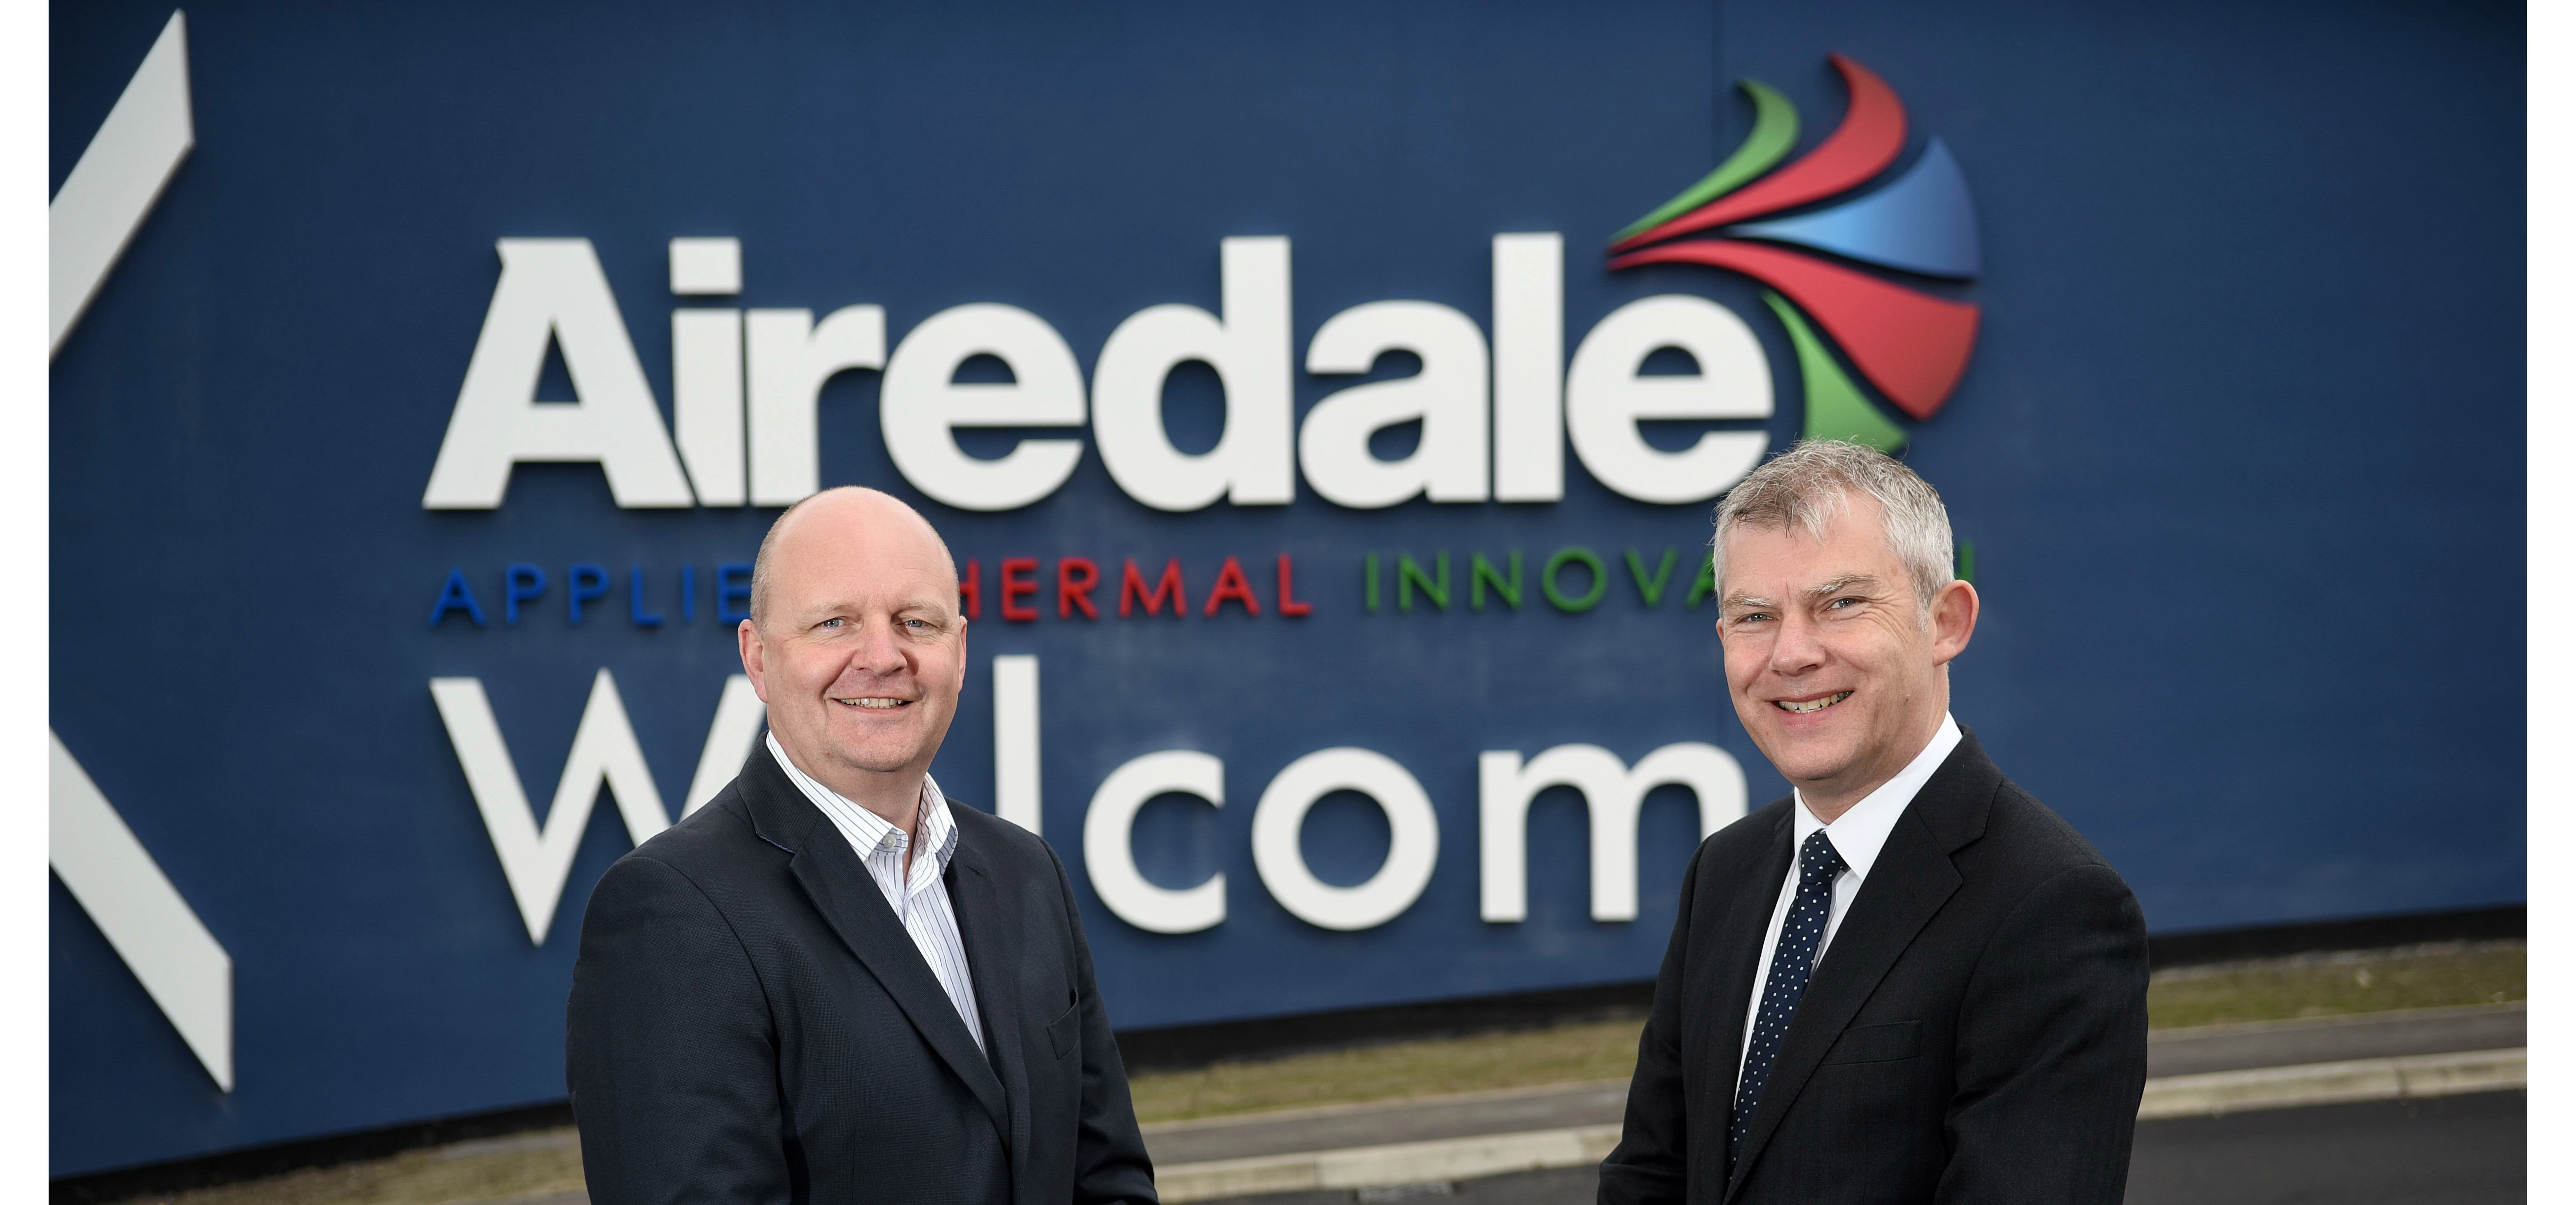 Tony Cole Operations Director at Airedale and Keith Hardcastle Director at Darnton B3.